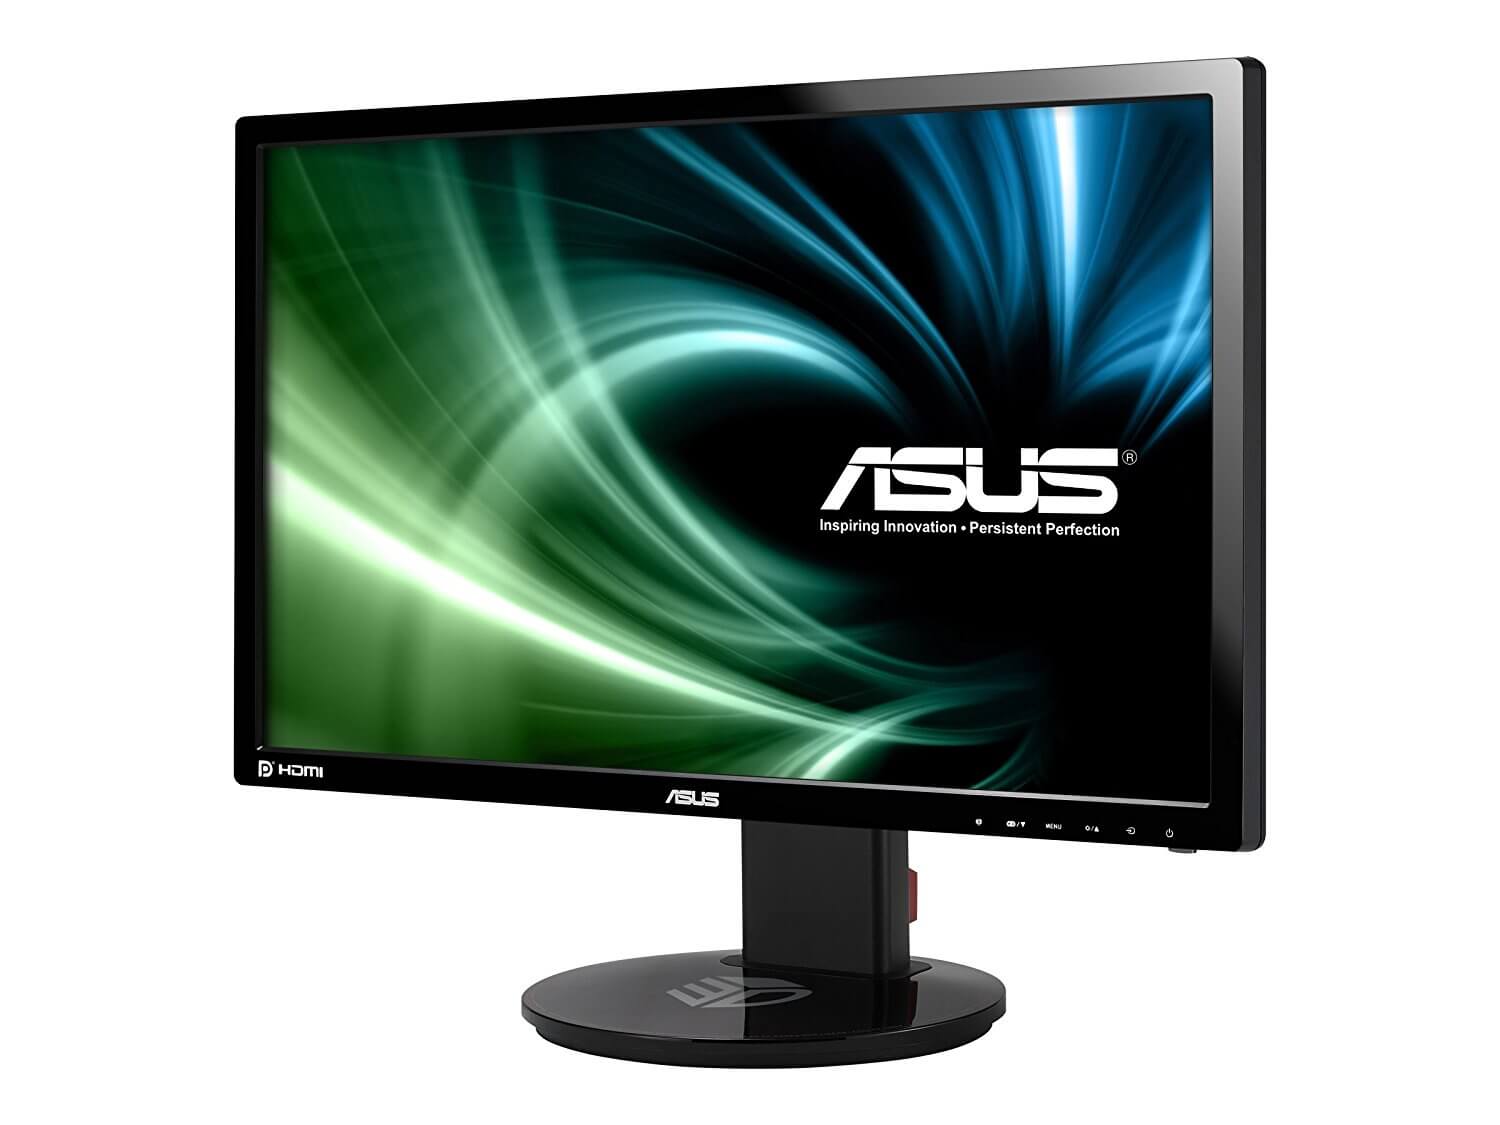 ASUS VG248QE Features